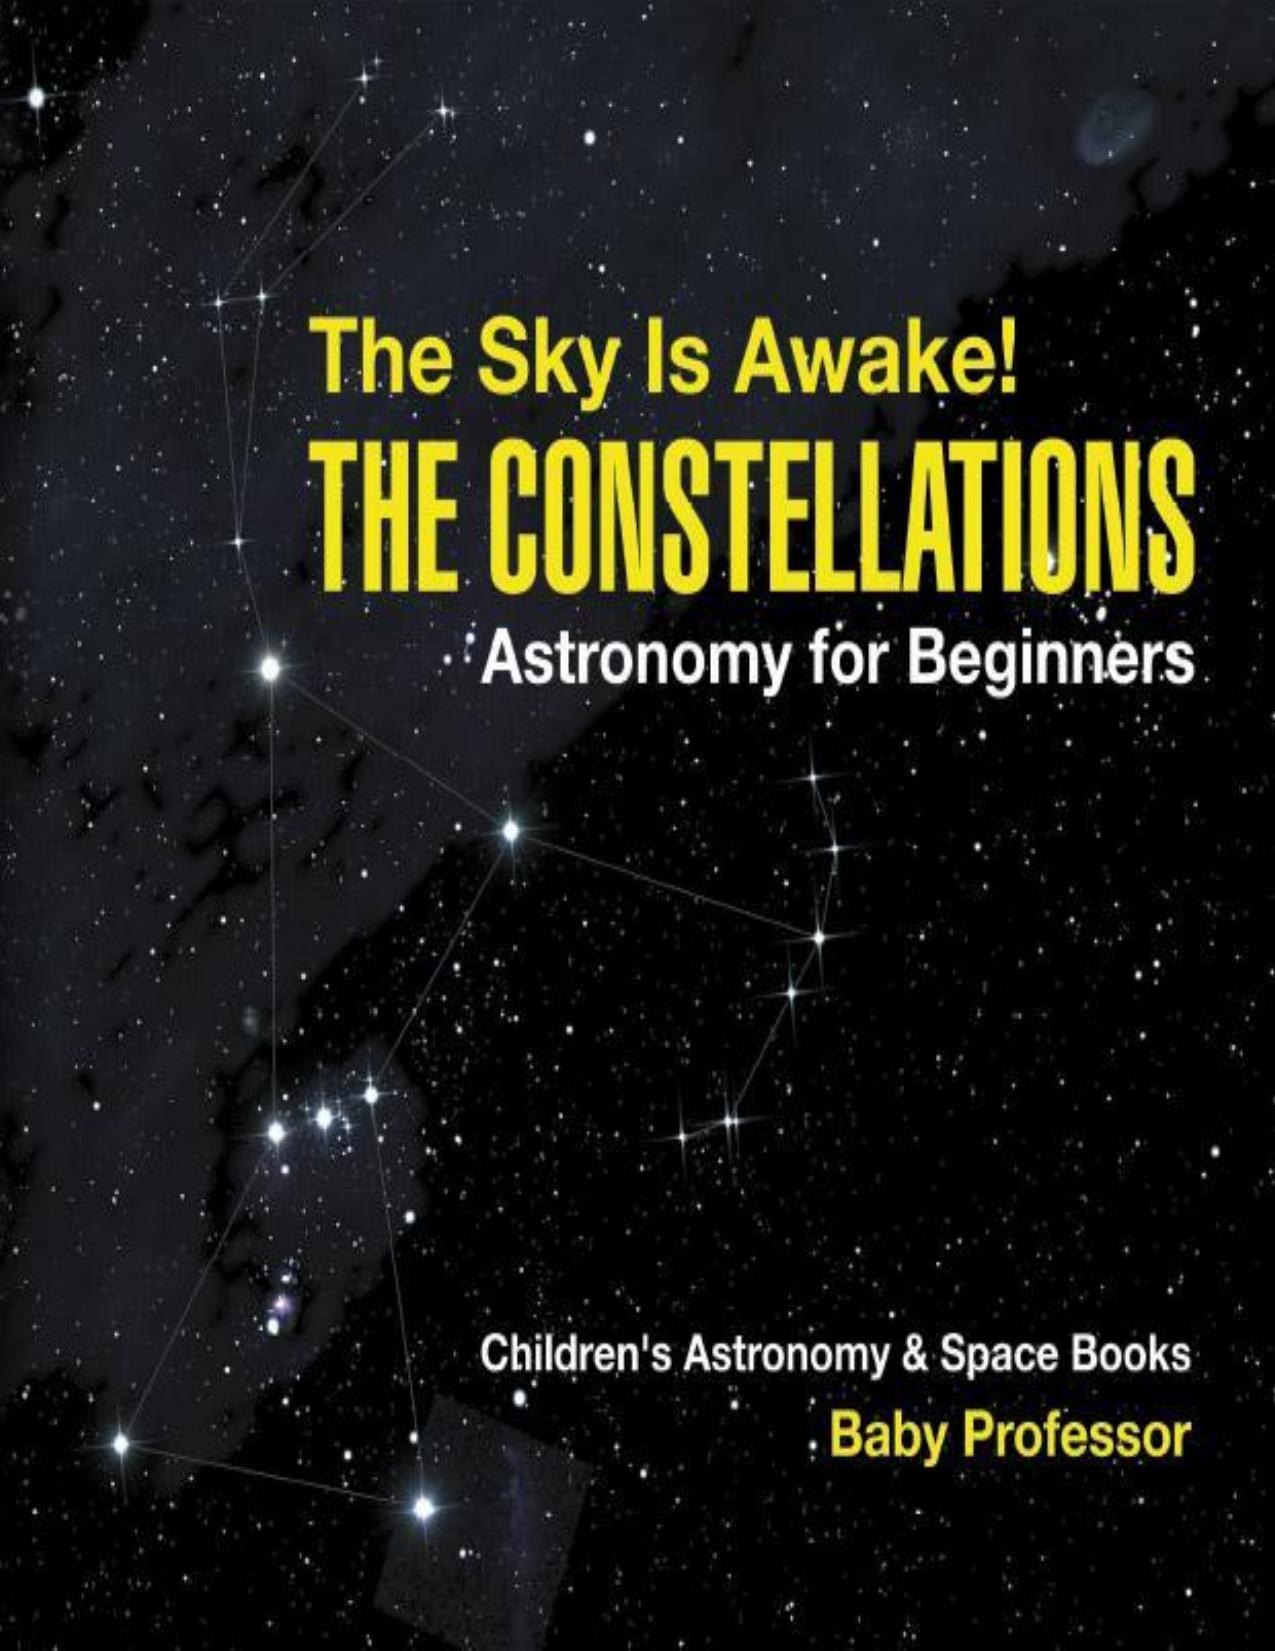 The Sky Is Awake! The Constellations - Astronomy for Beginners | Children's Astronomy & Space Books by Baby Professor